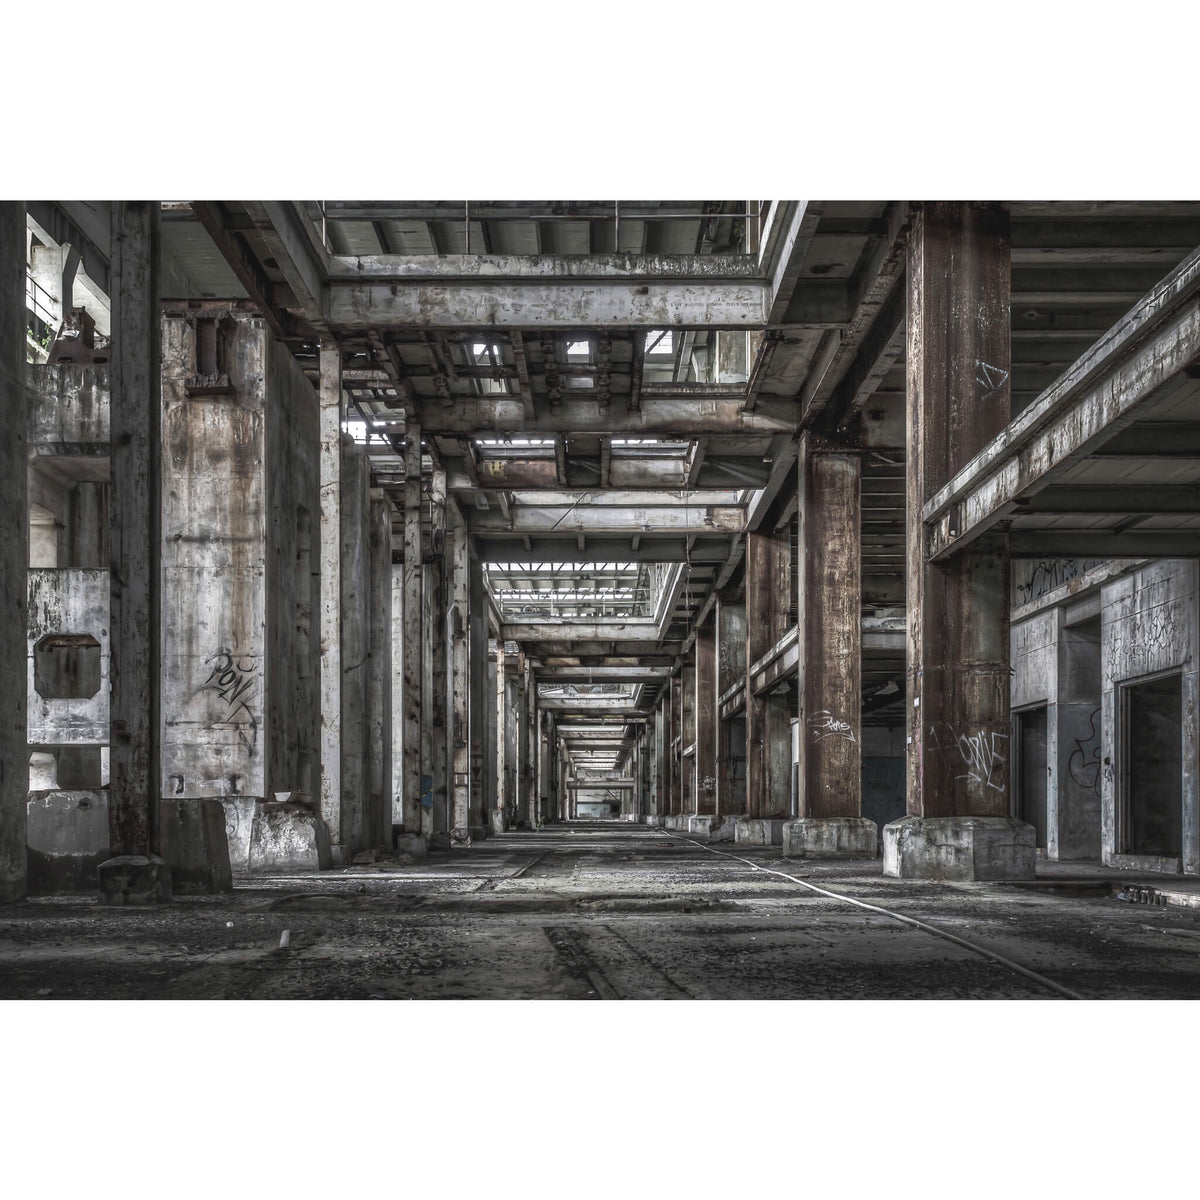 Turbine Hall Basement Looking From A To B Station | Wangi Power Station